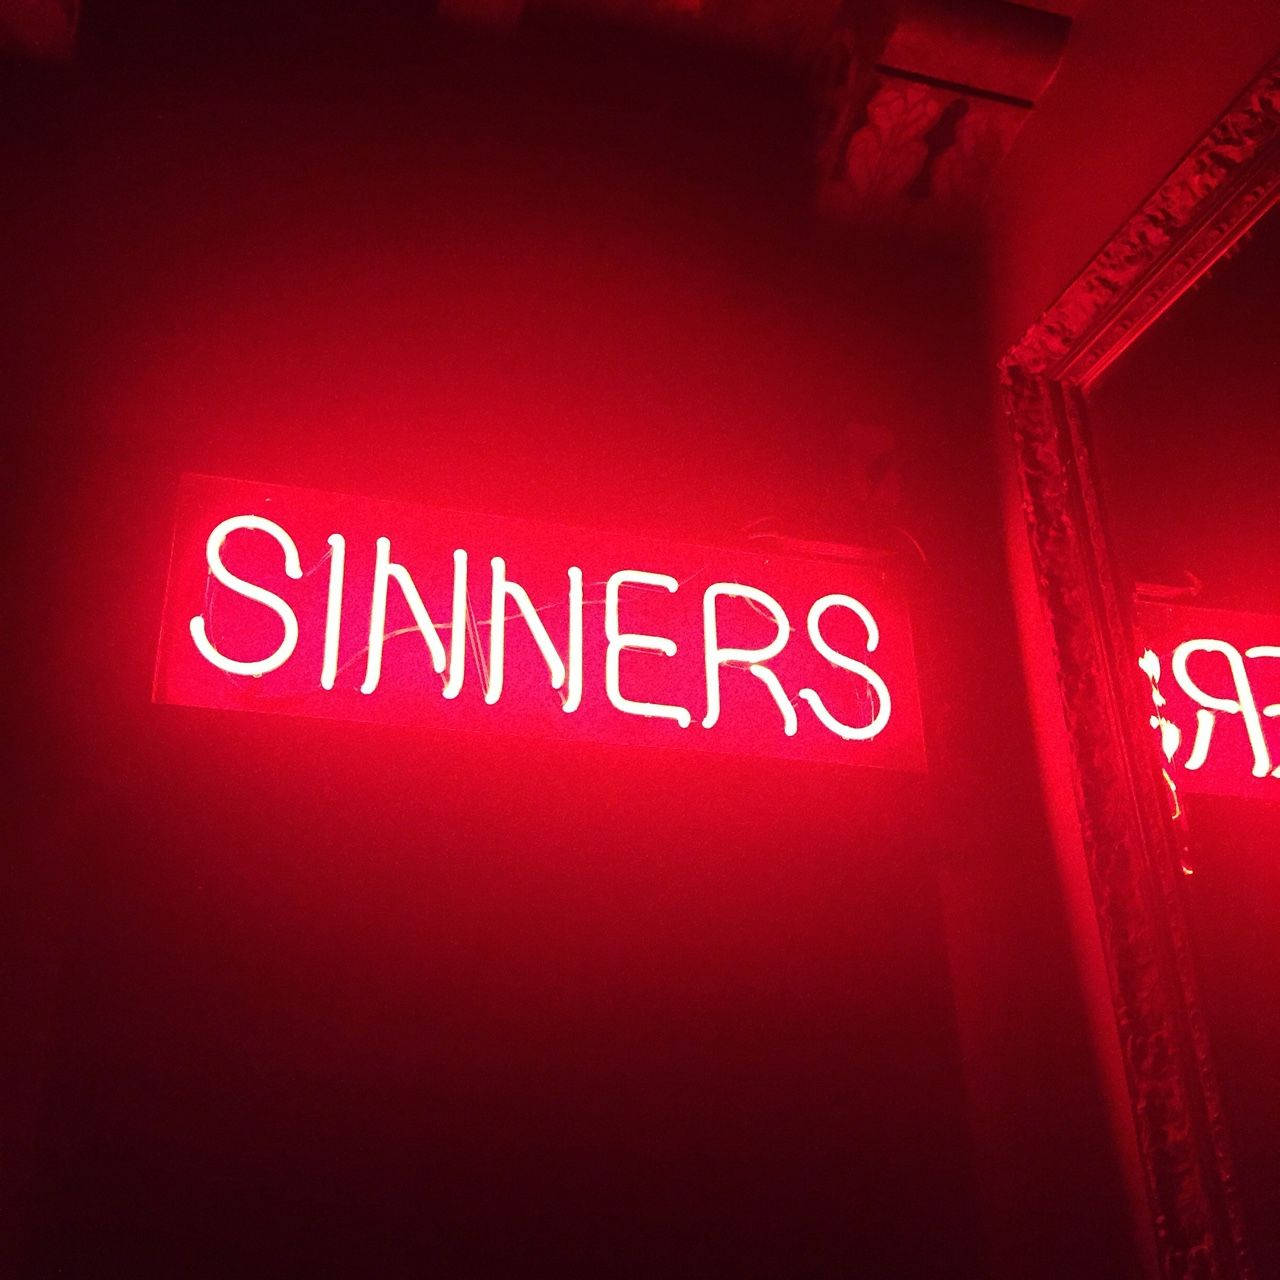 Red Aesthetic Neon Sinners Background